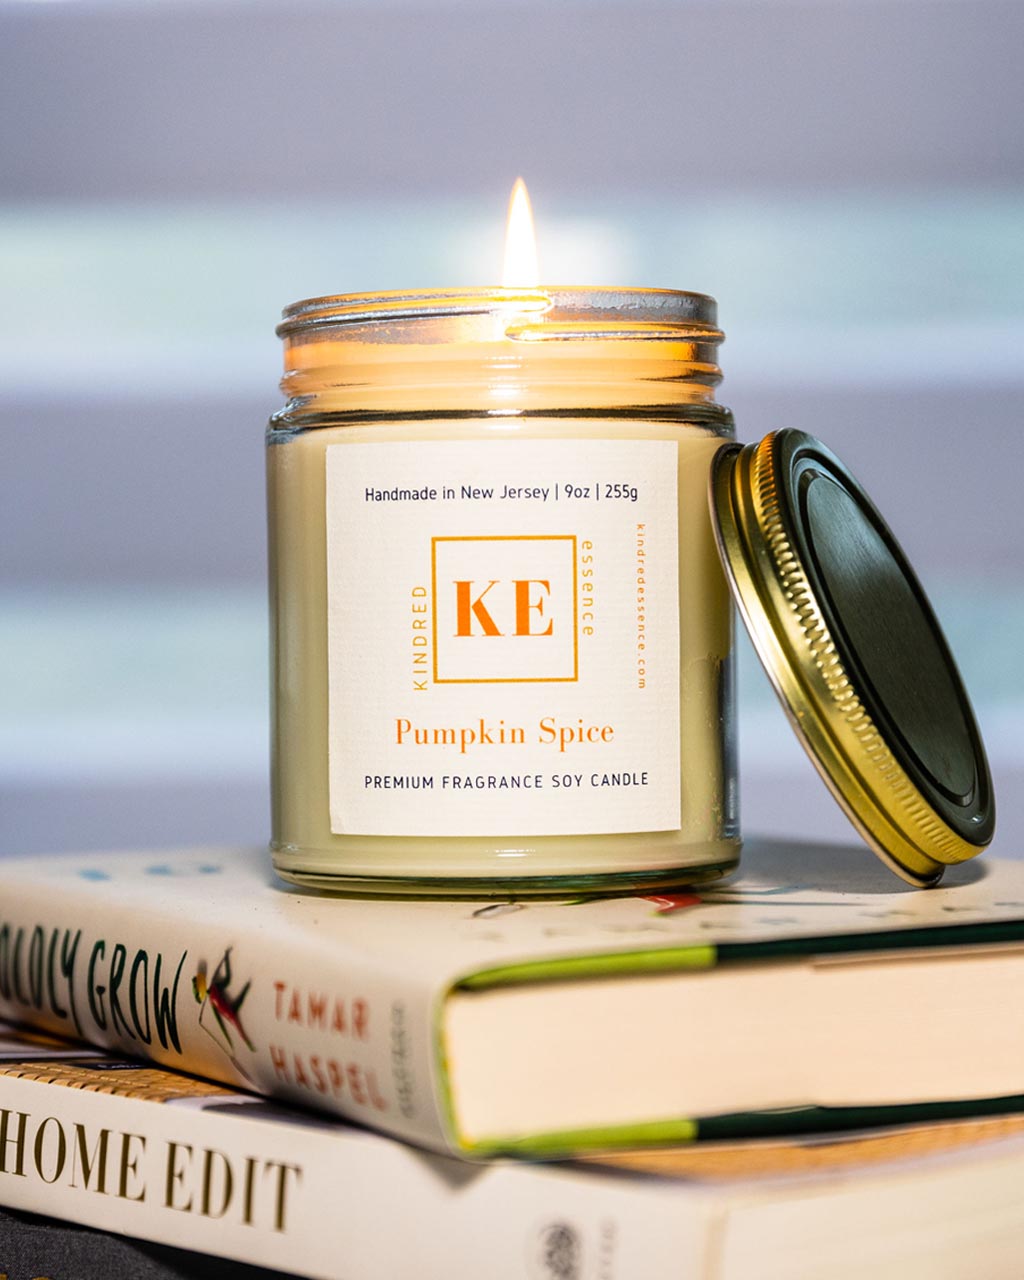 Pumpkin Spice Candles and Wax Melts – SurlyMommaCat Candles